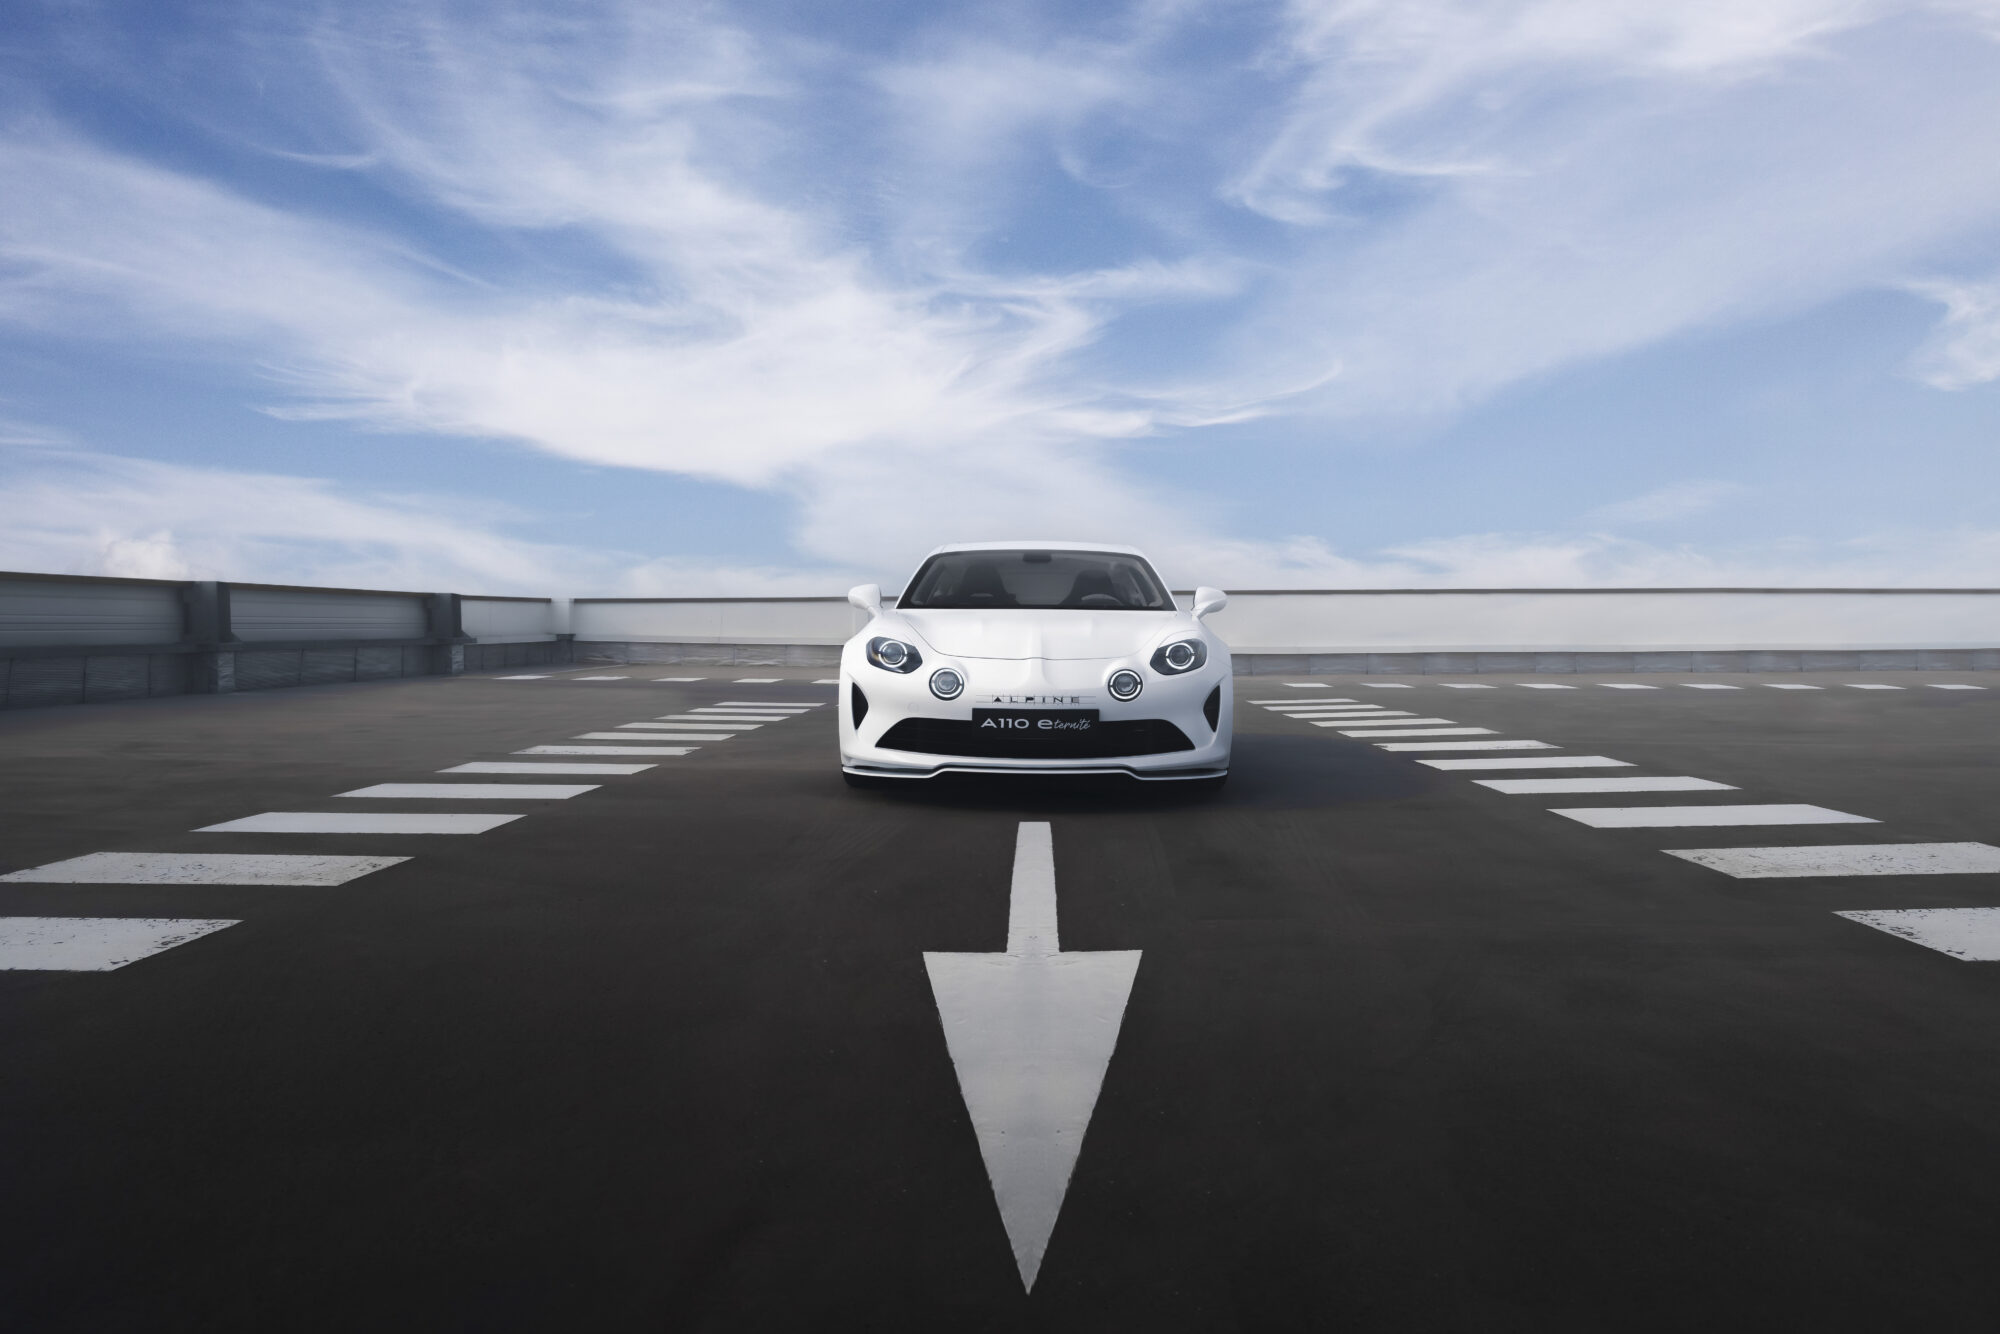 2022 - A110 E-ternité : a 100% electric prototype at the cutting edge of Alpine innovation